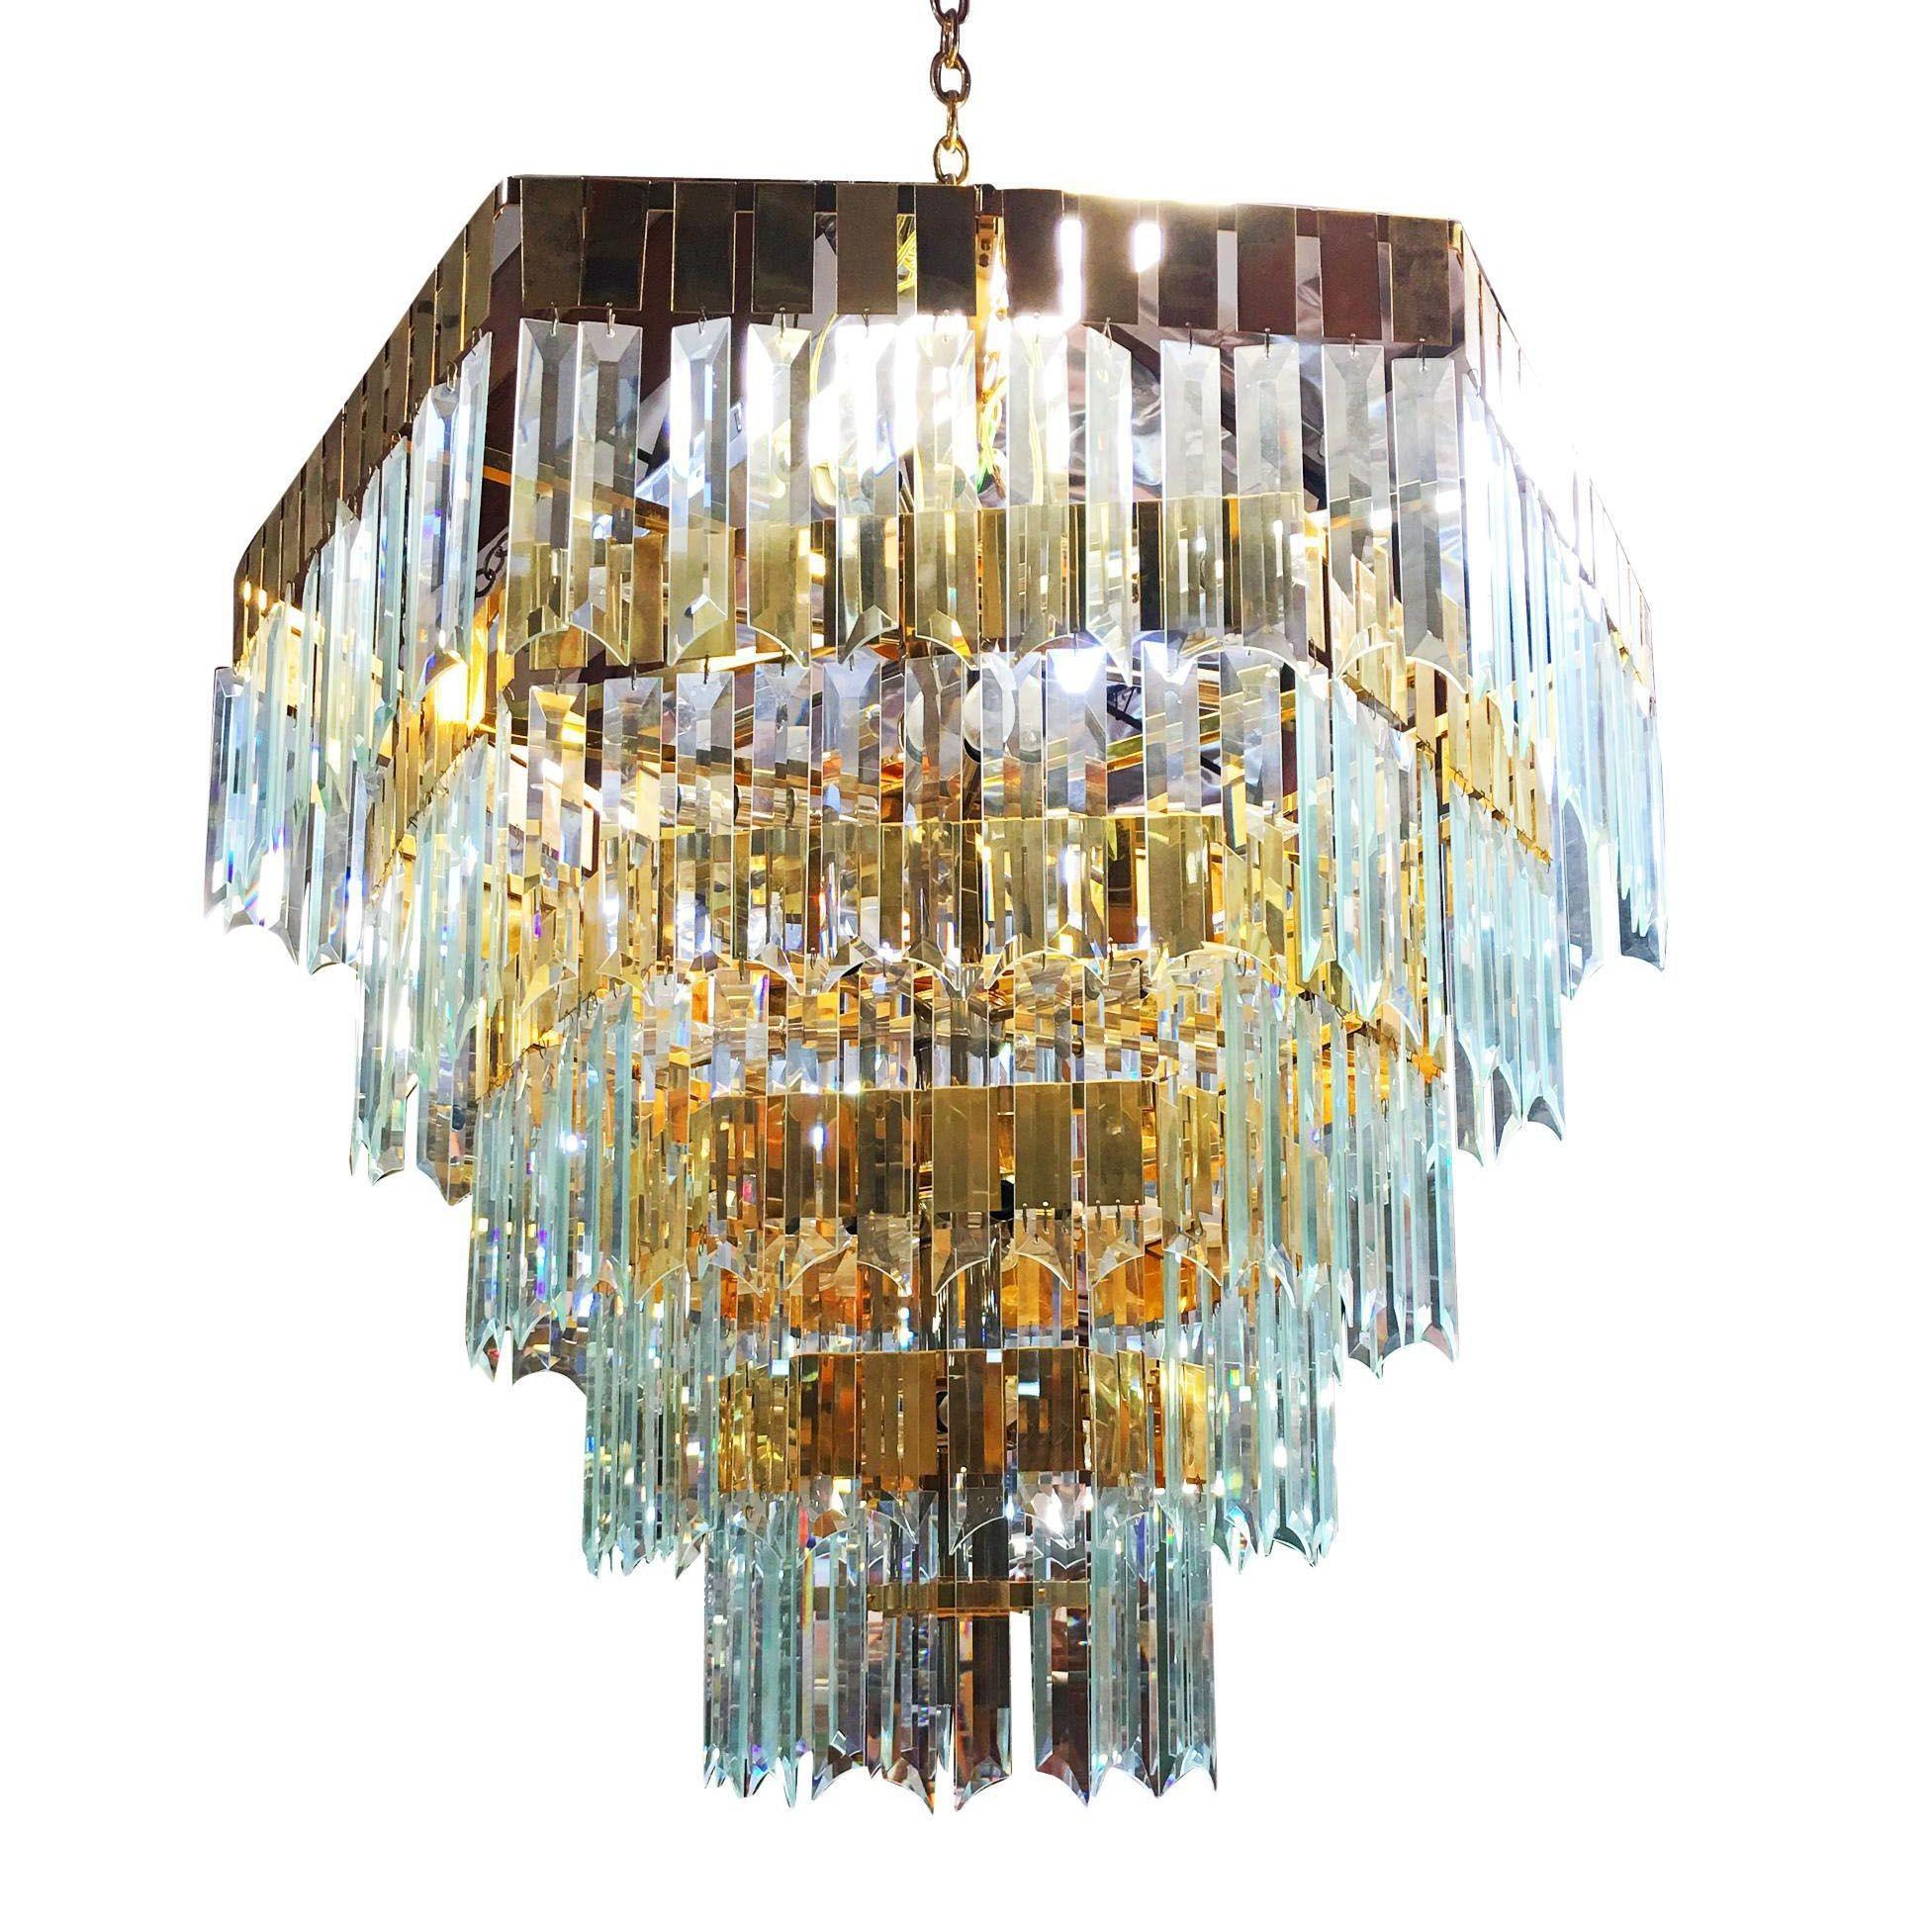 1970s Modernist Hanging Crystal Brass Chandelier In Excellent Condition For Sale In Van Nuys, CA